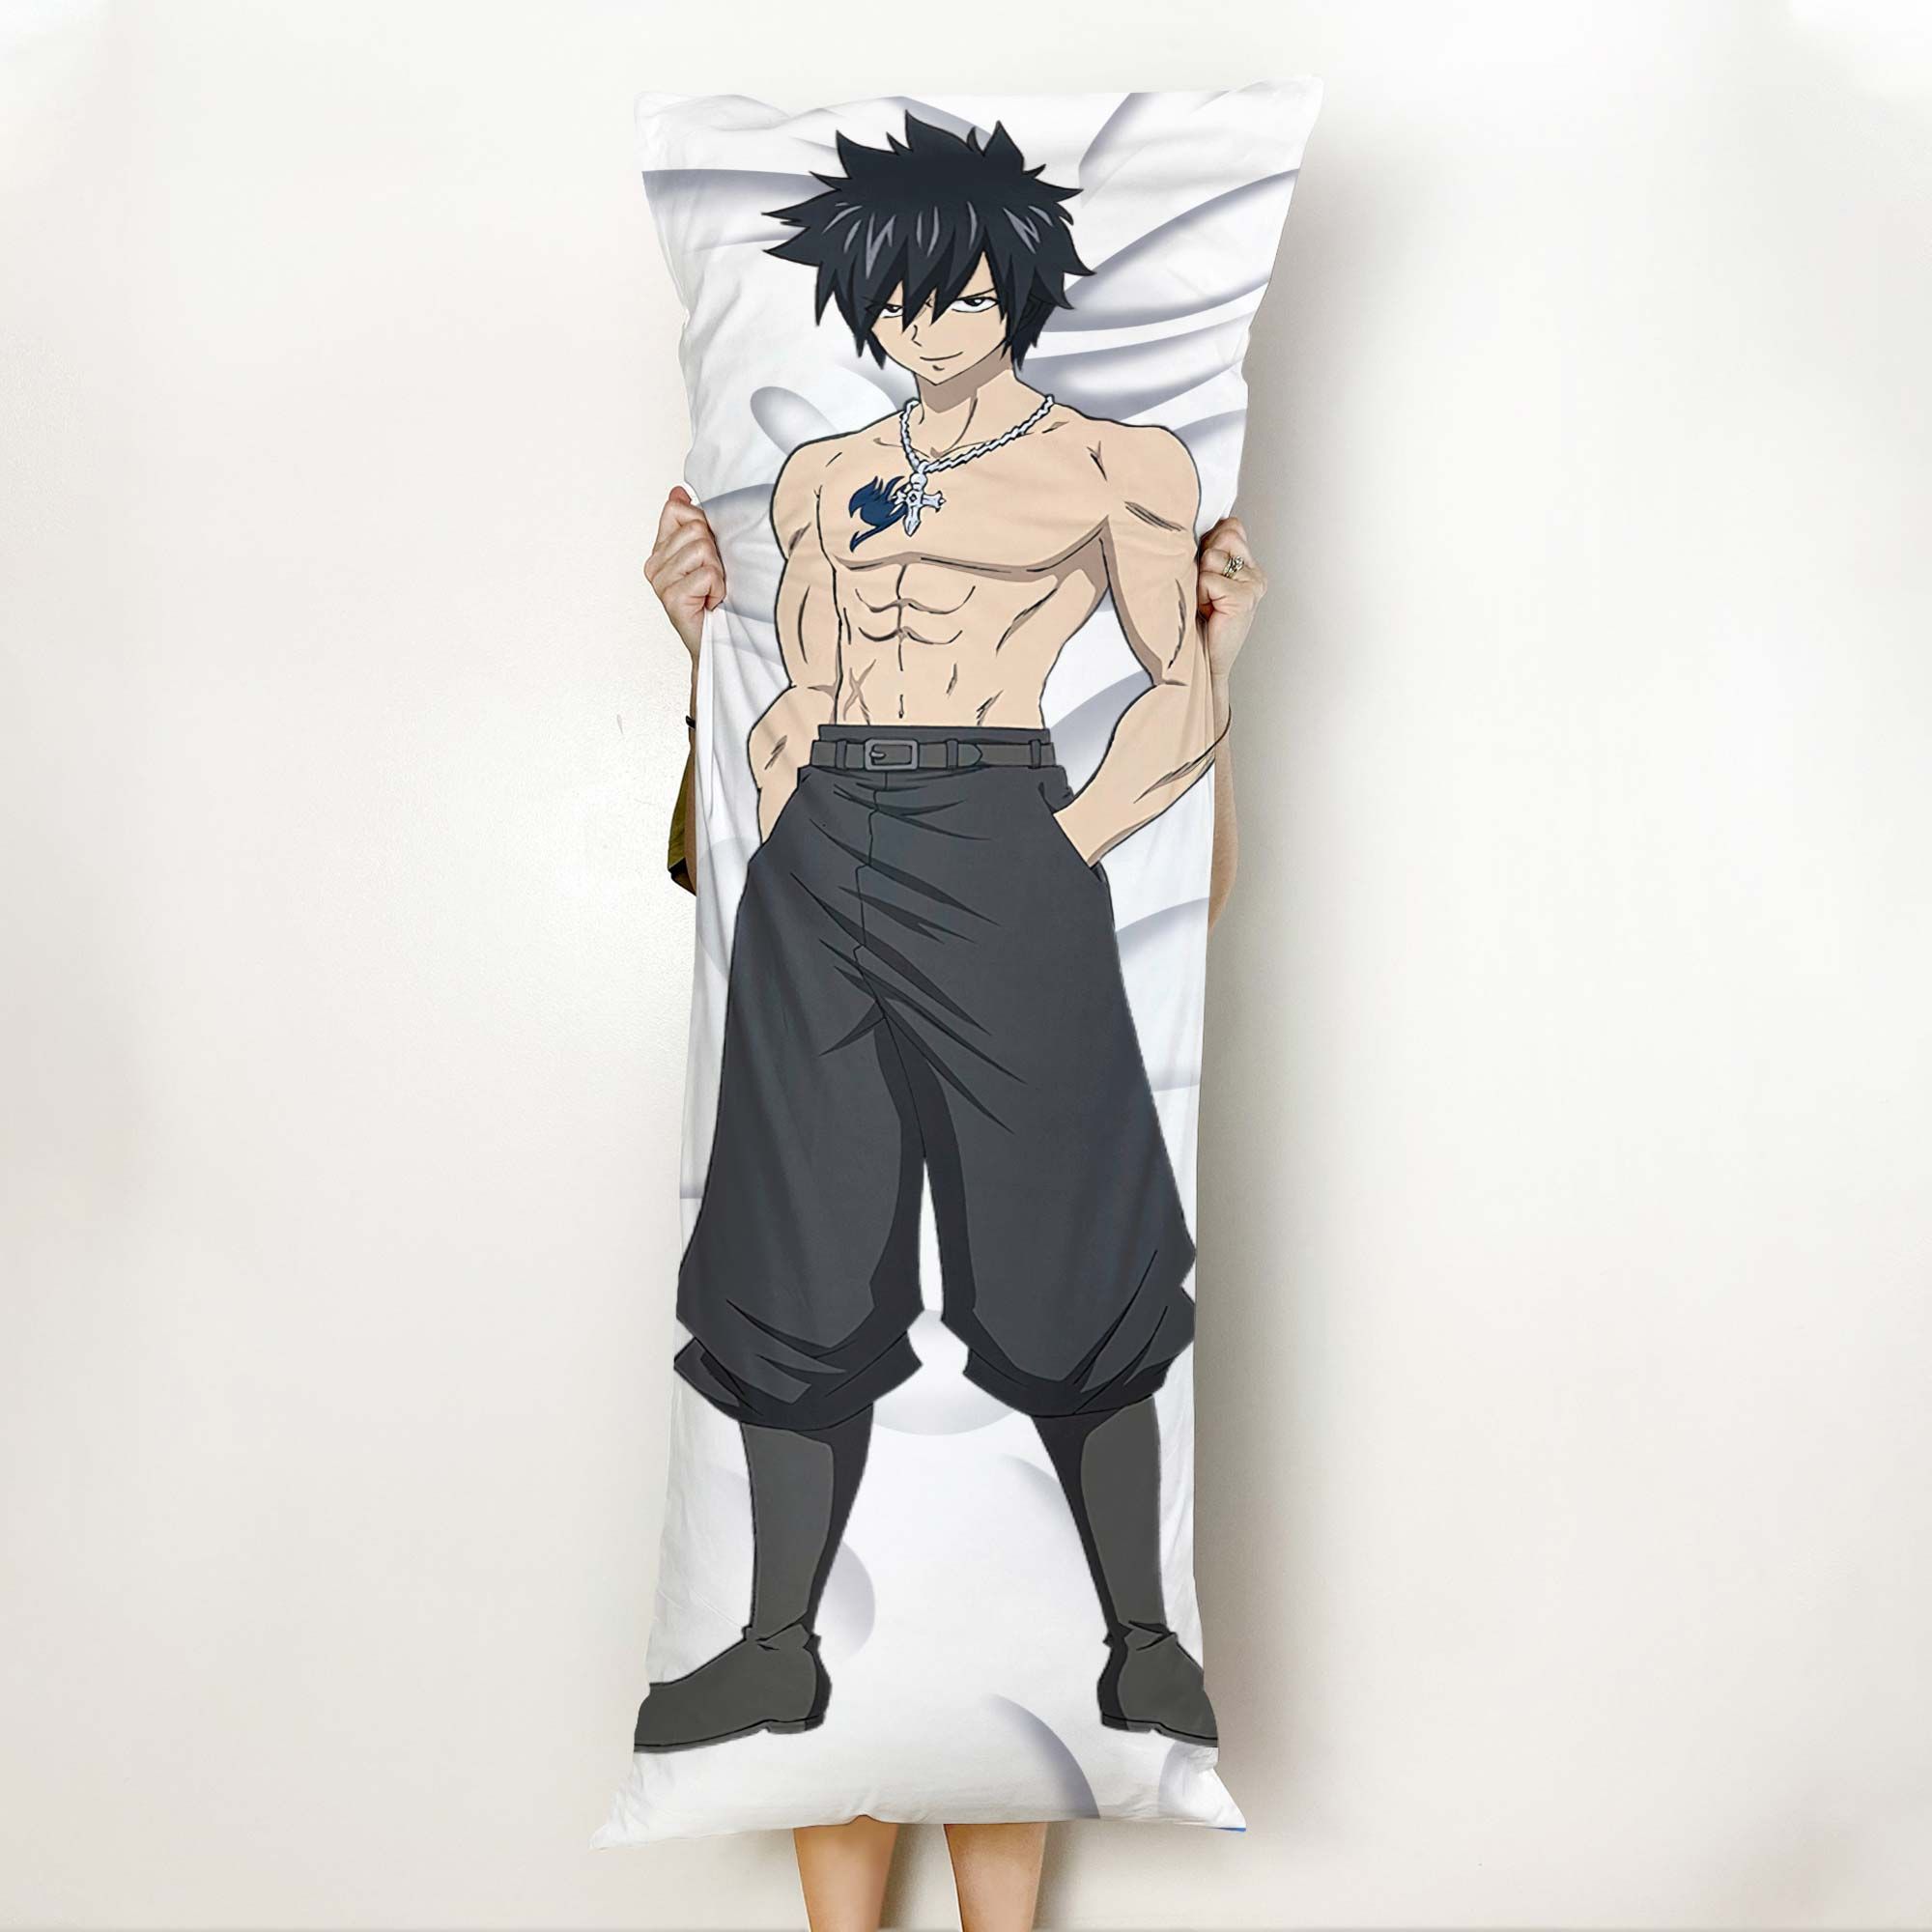 Gray Fullbuster Body Pillow Cover Custom Fairy Tail Anime Gifts Official Merch GO0110